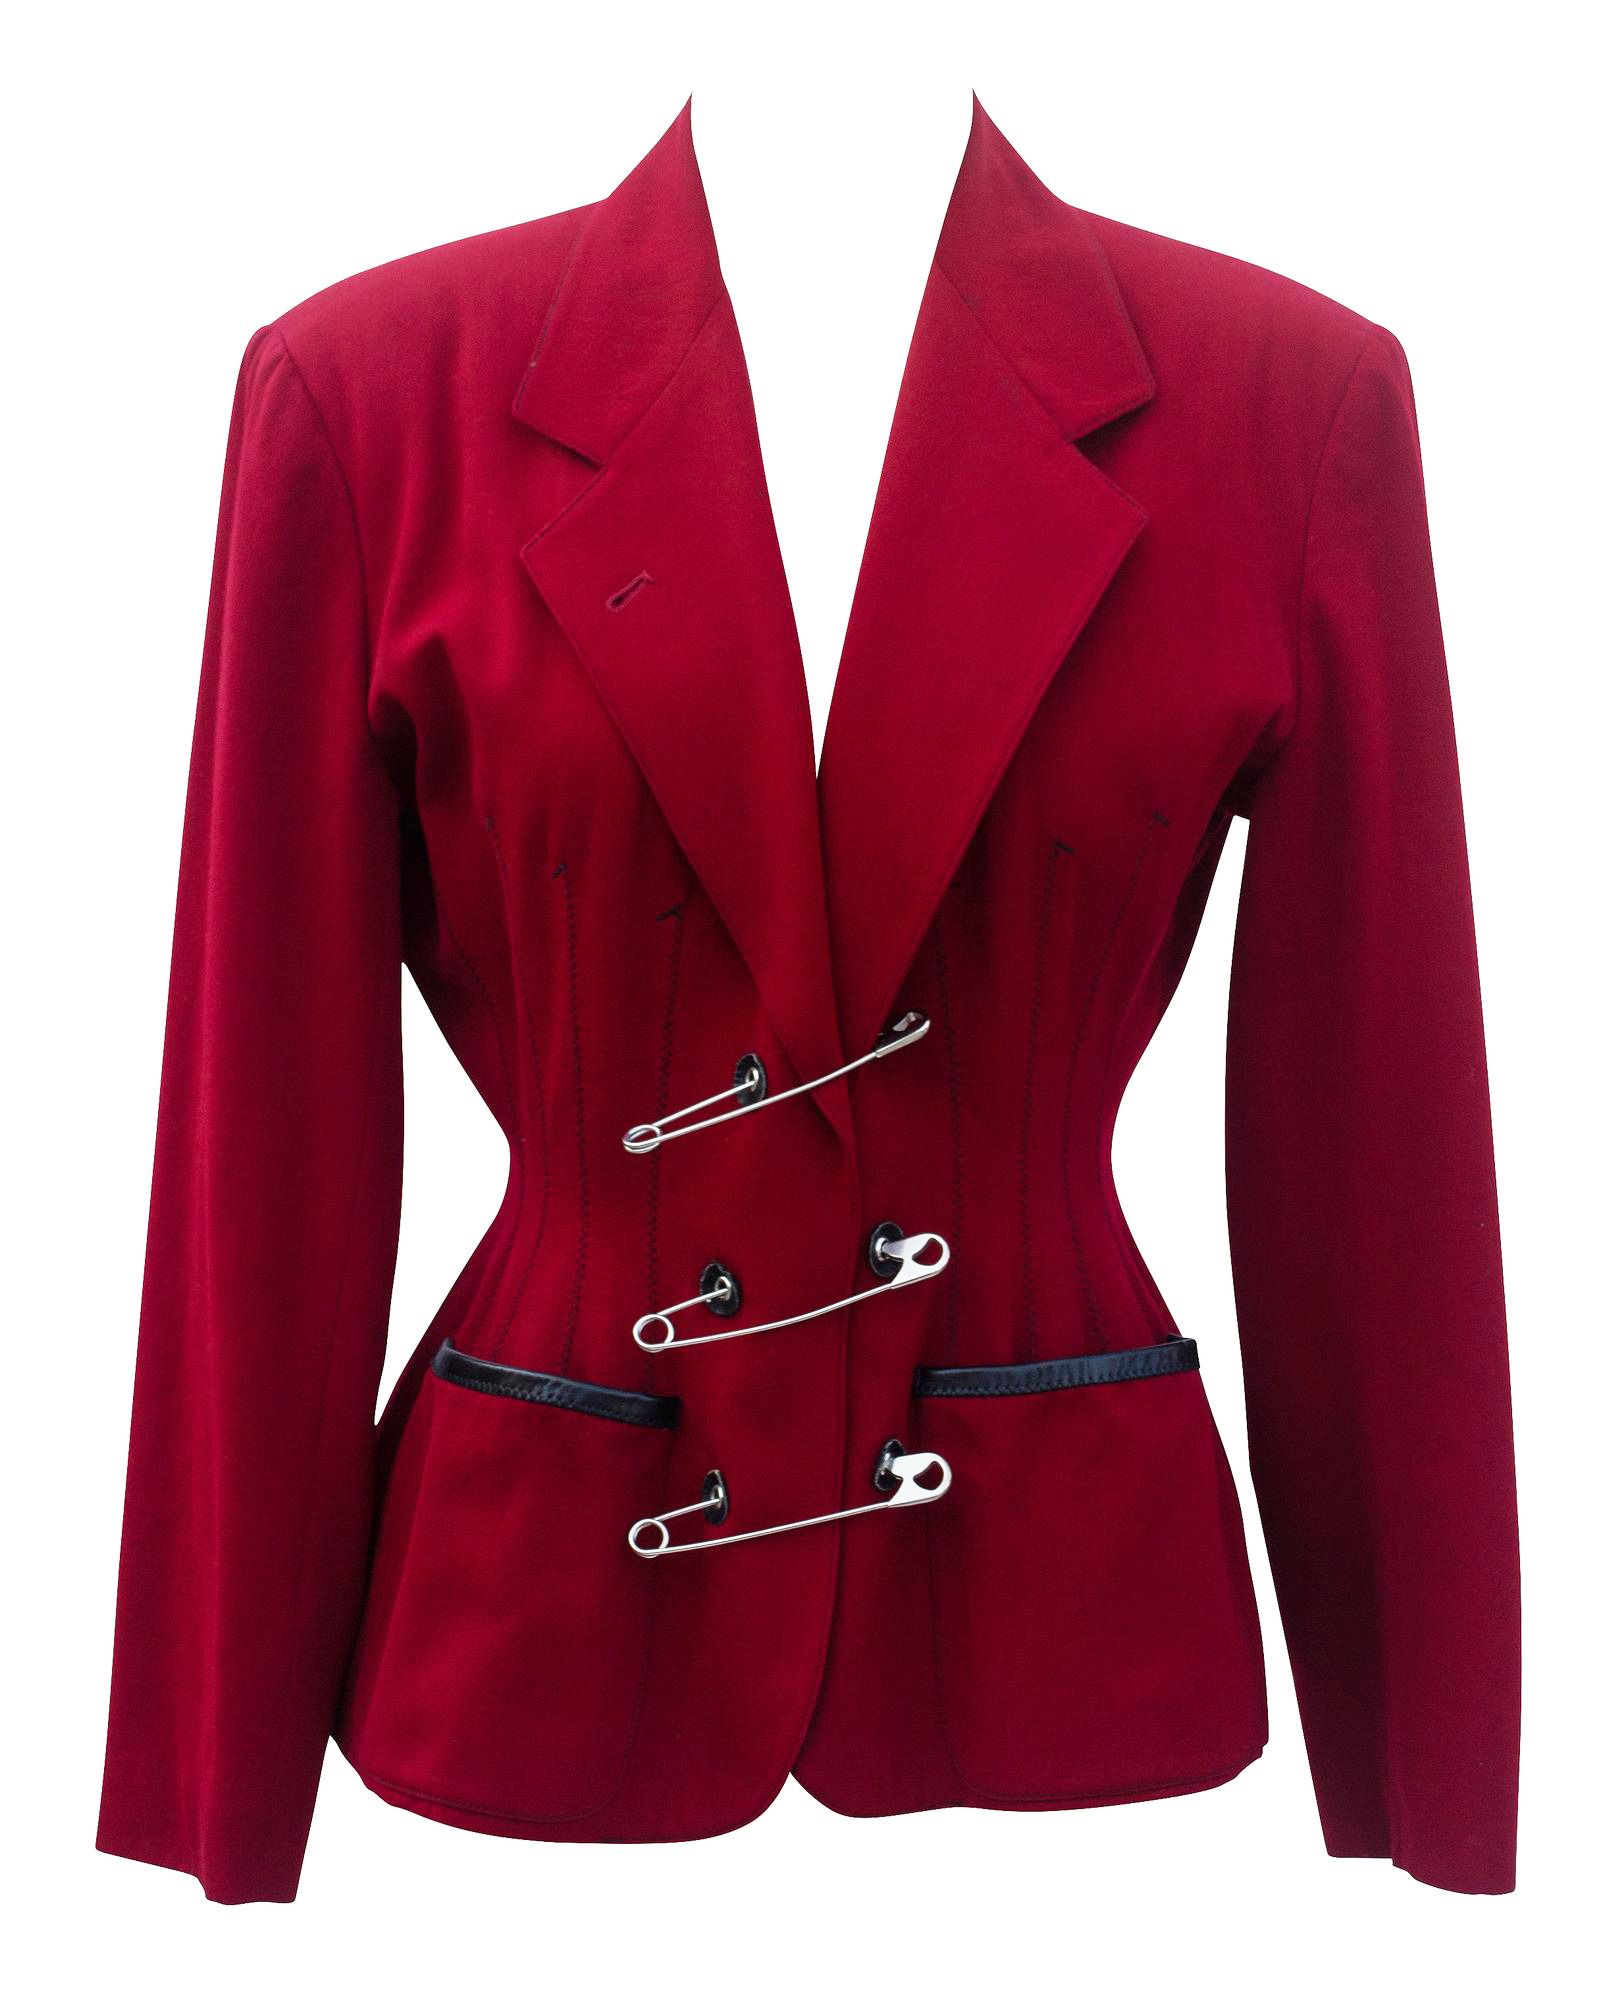 Jean Paul Gaultier SAFETY PINS JACKET Description: Iconic red wool jacket...